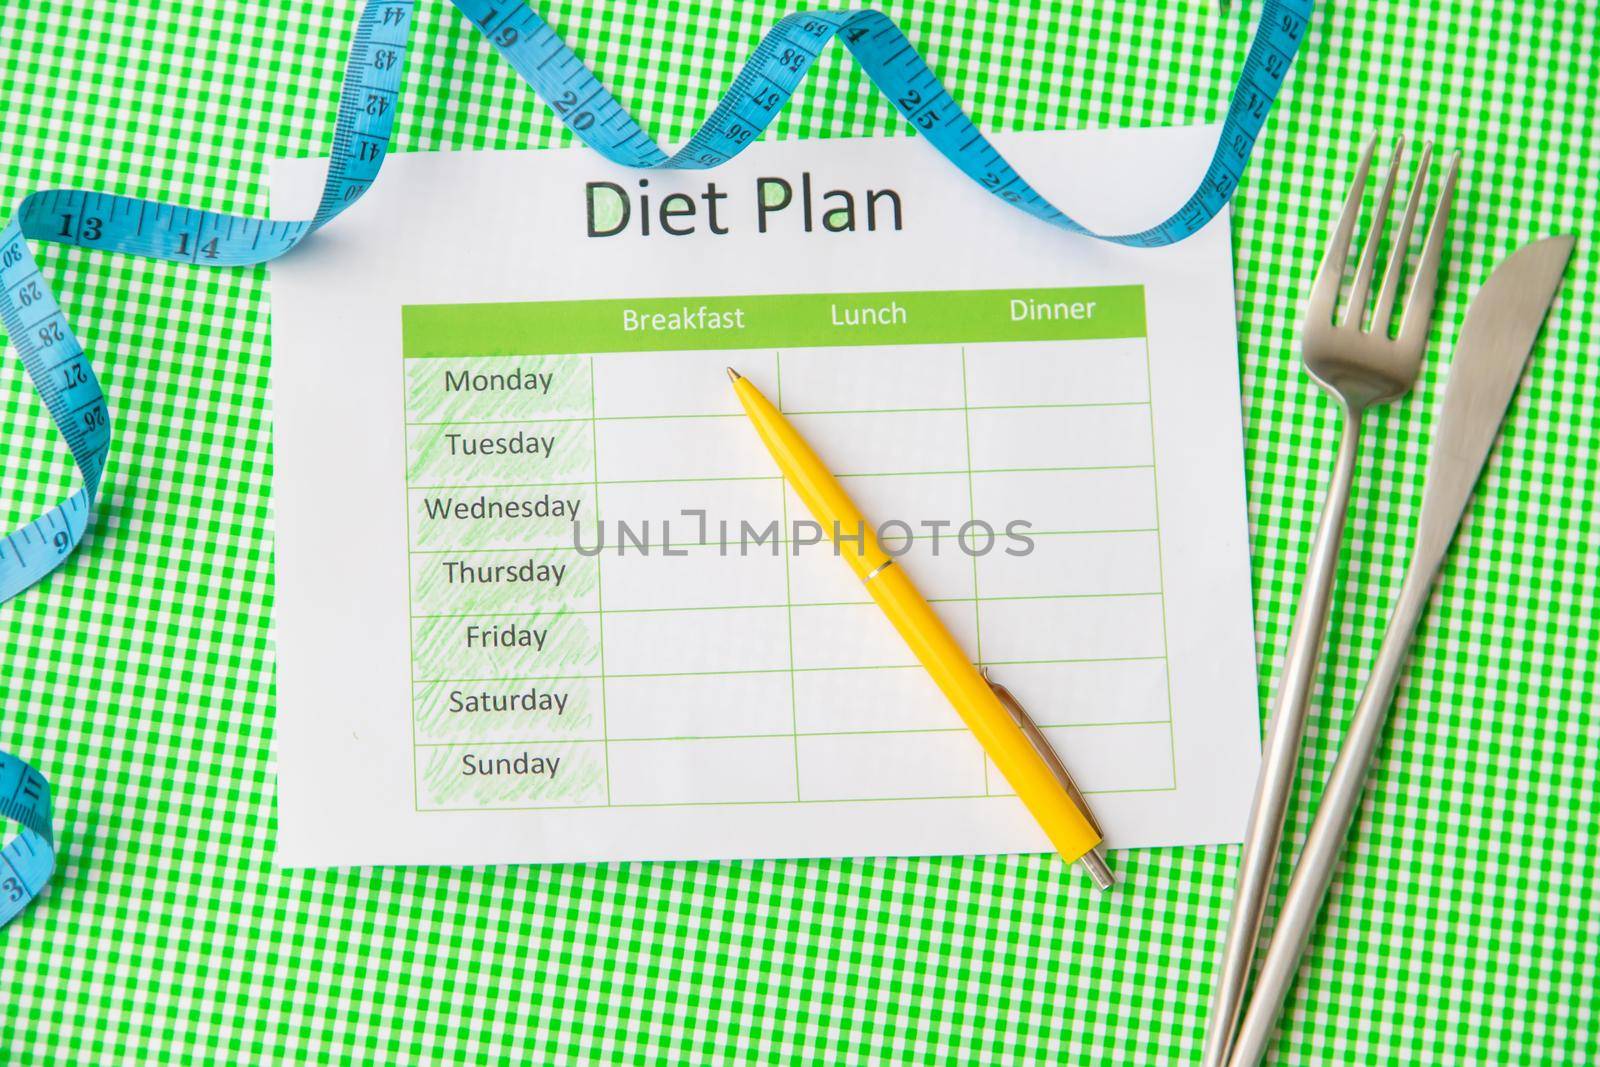 Weekly diet plan. The concept of proper nutrition. Selective focus. nature.